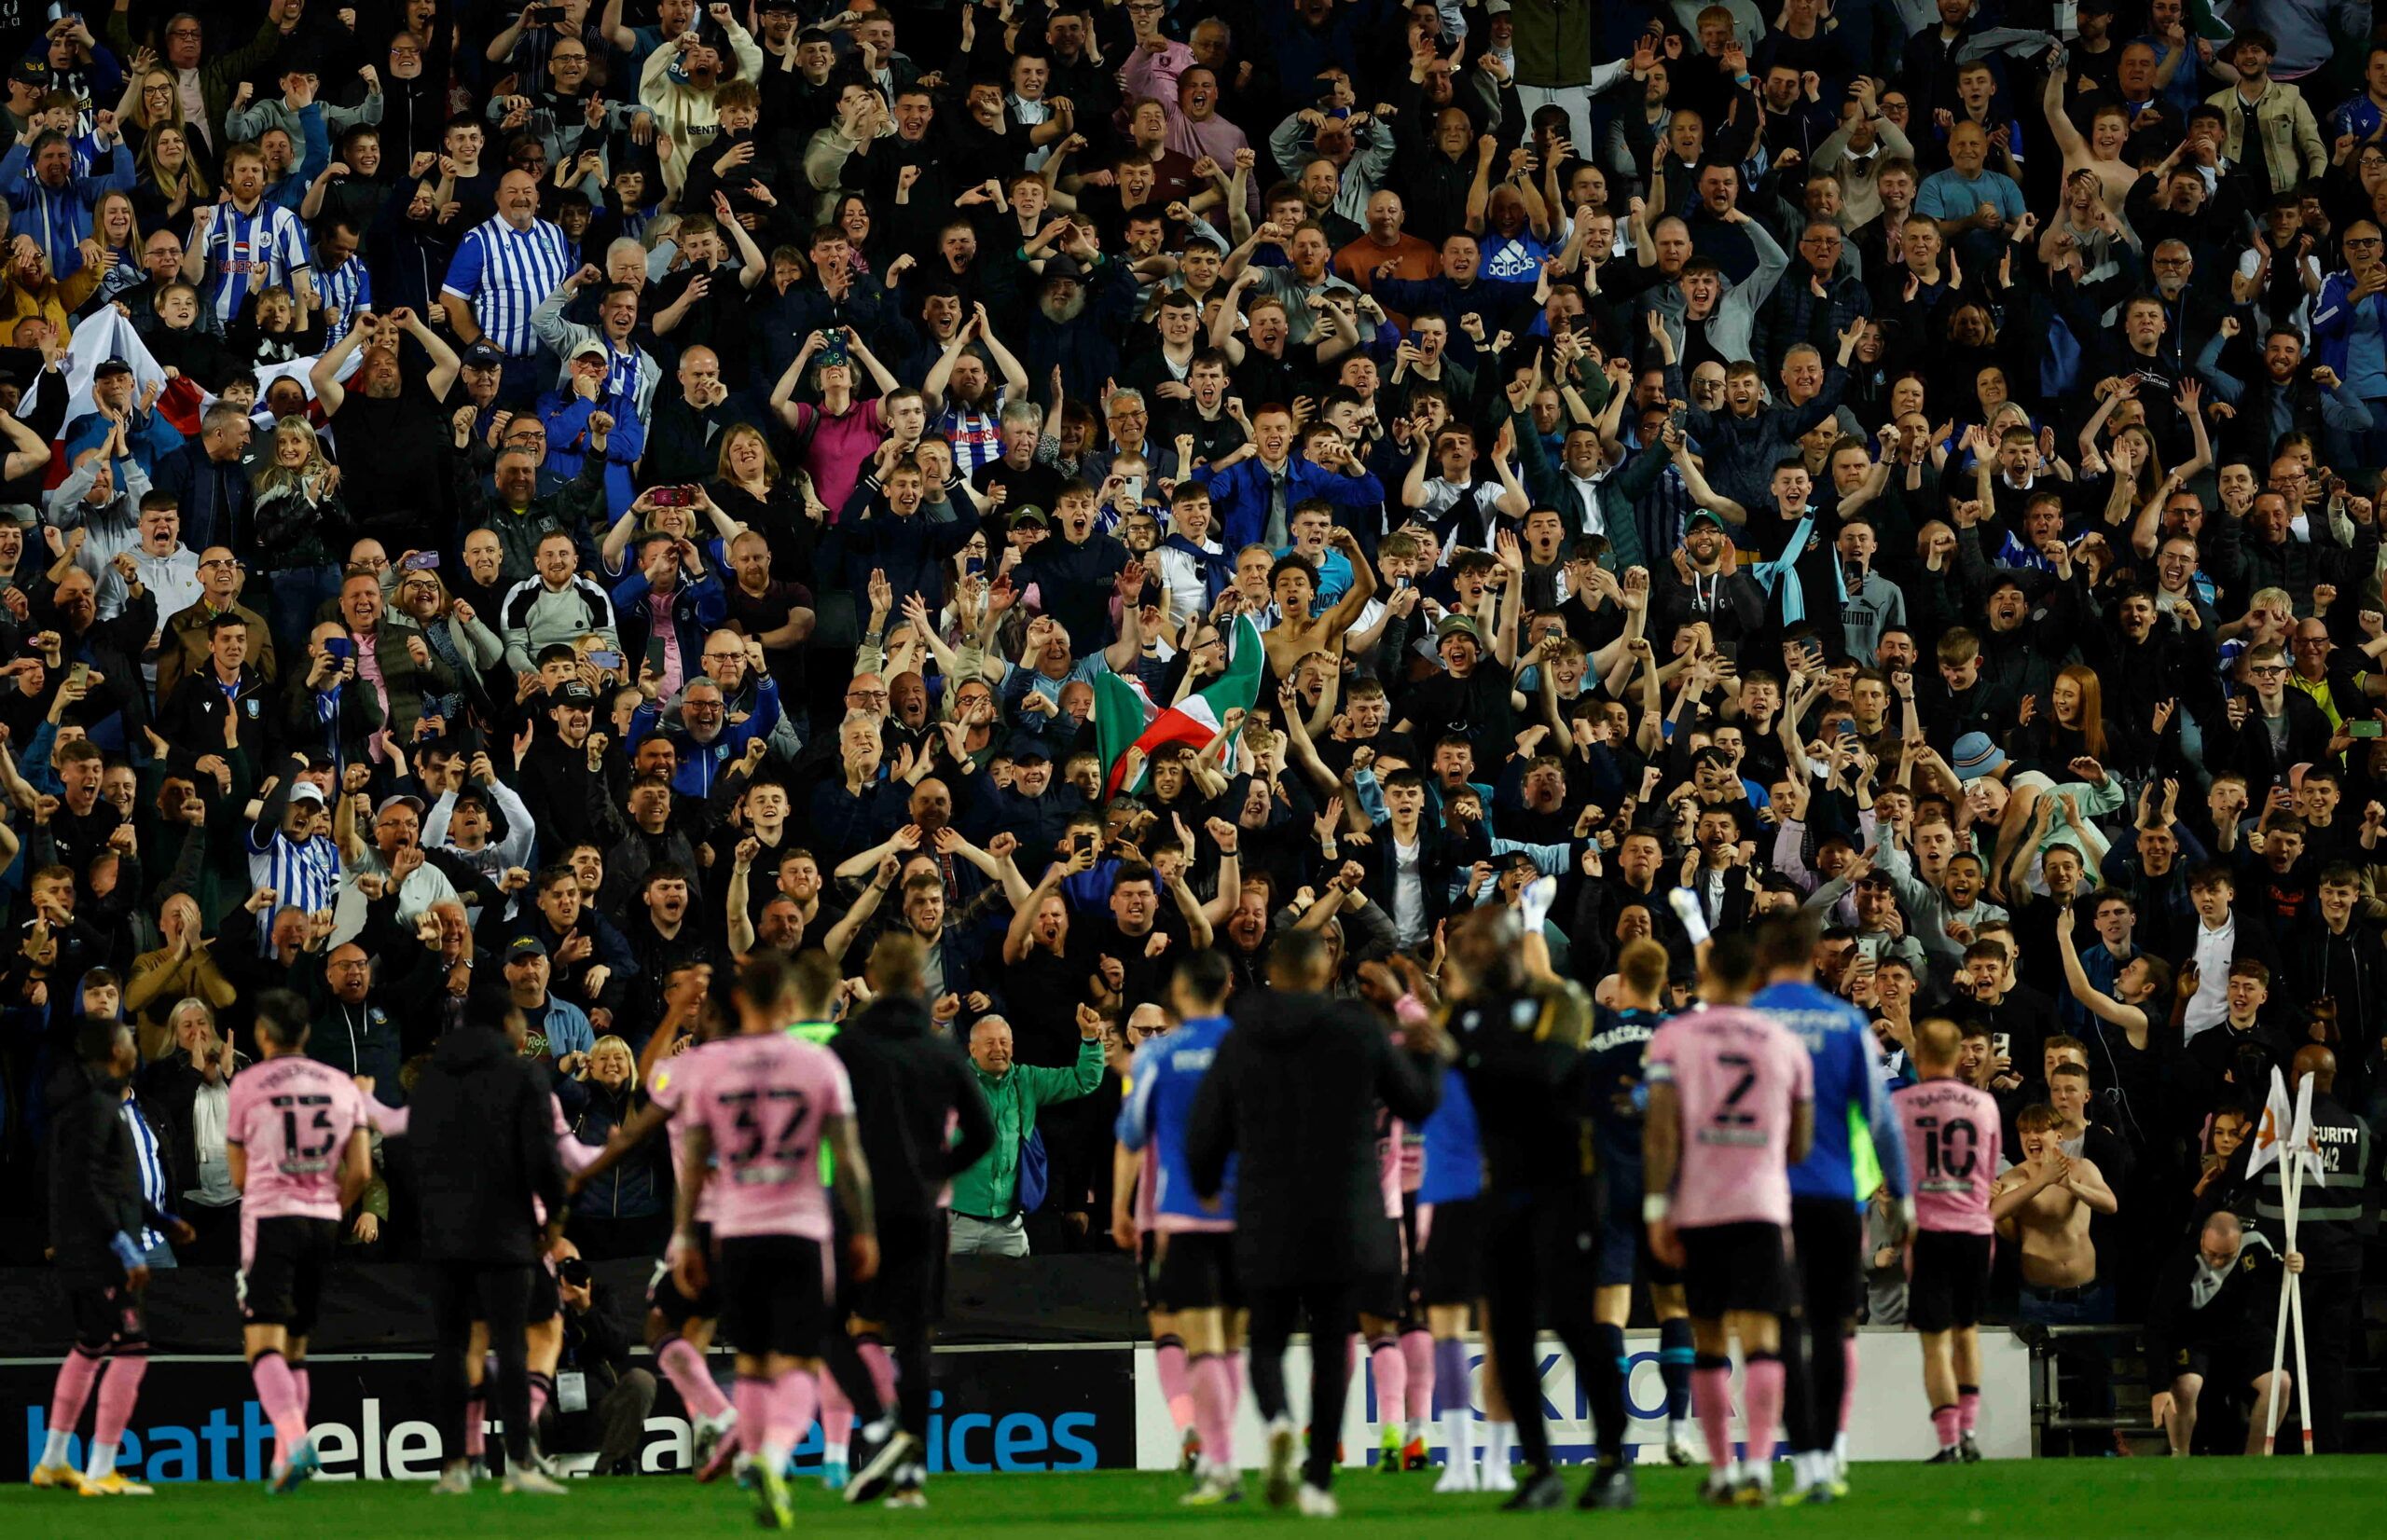 Soccer Football - League One - Milton Keynes Dons v Sheffield Wednesday - Stadium MK, Milton Keynes, Britain - April 16, 2022 Sheffield Wednesday players celebrate with fans after the match  Action Images/Andrew Boyers  EDITORIAL USE ONLY. No use with unauthorized audio, video, data, fixture lists, club/league logos or 